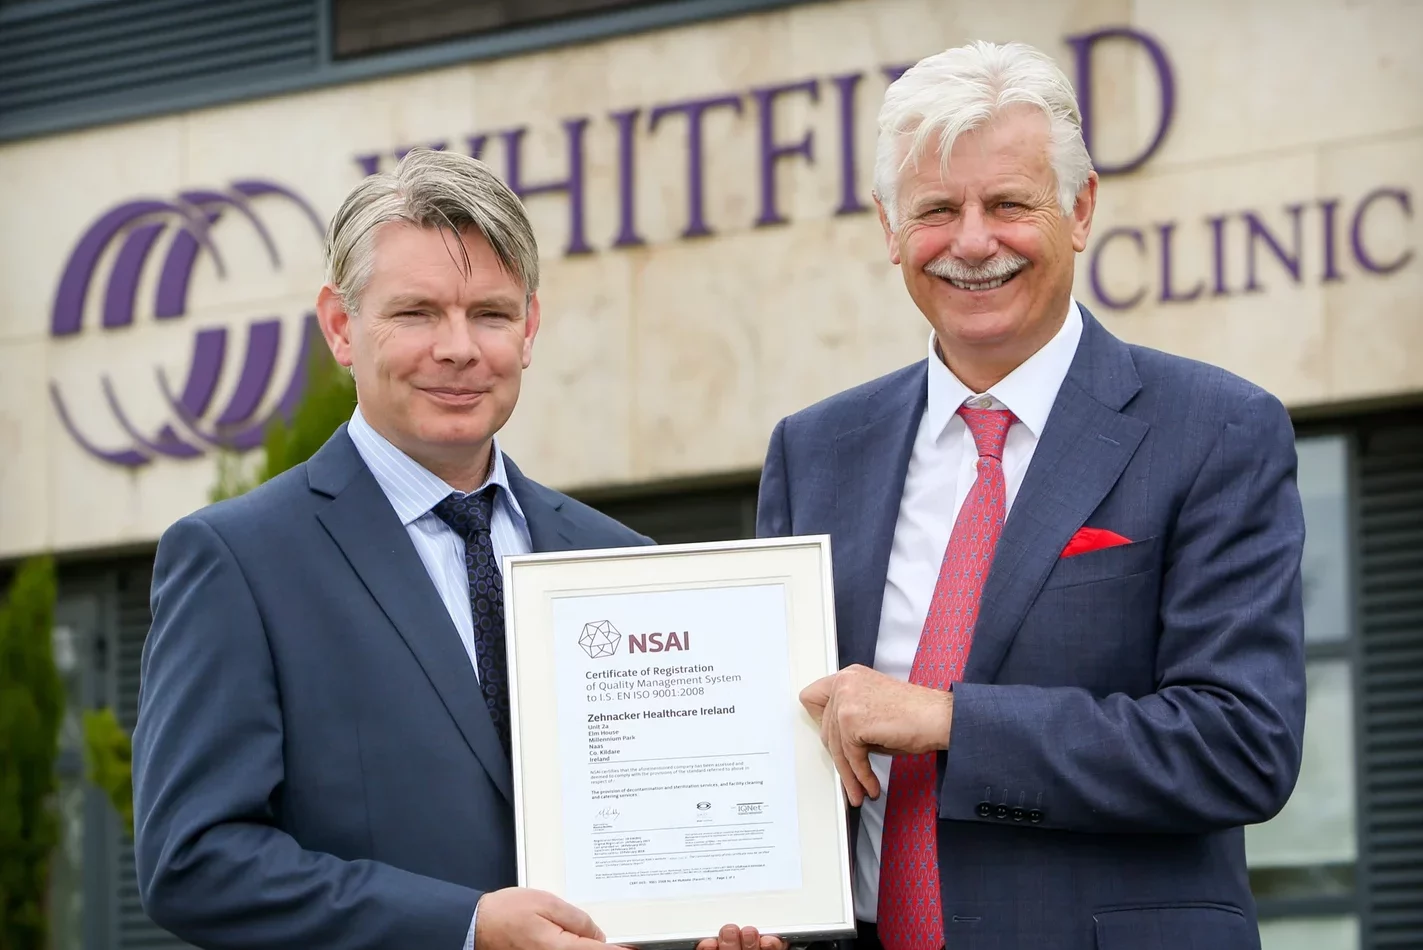 Zehnacker Healthcare awarded ISO 9001 for Cleaning Services in Whitfield Clinic